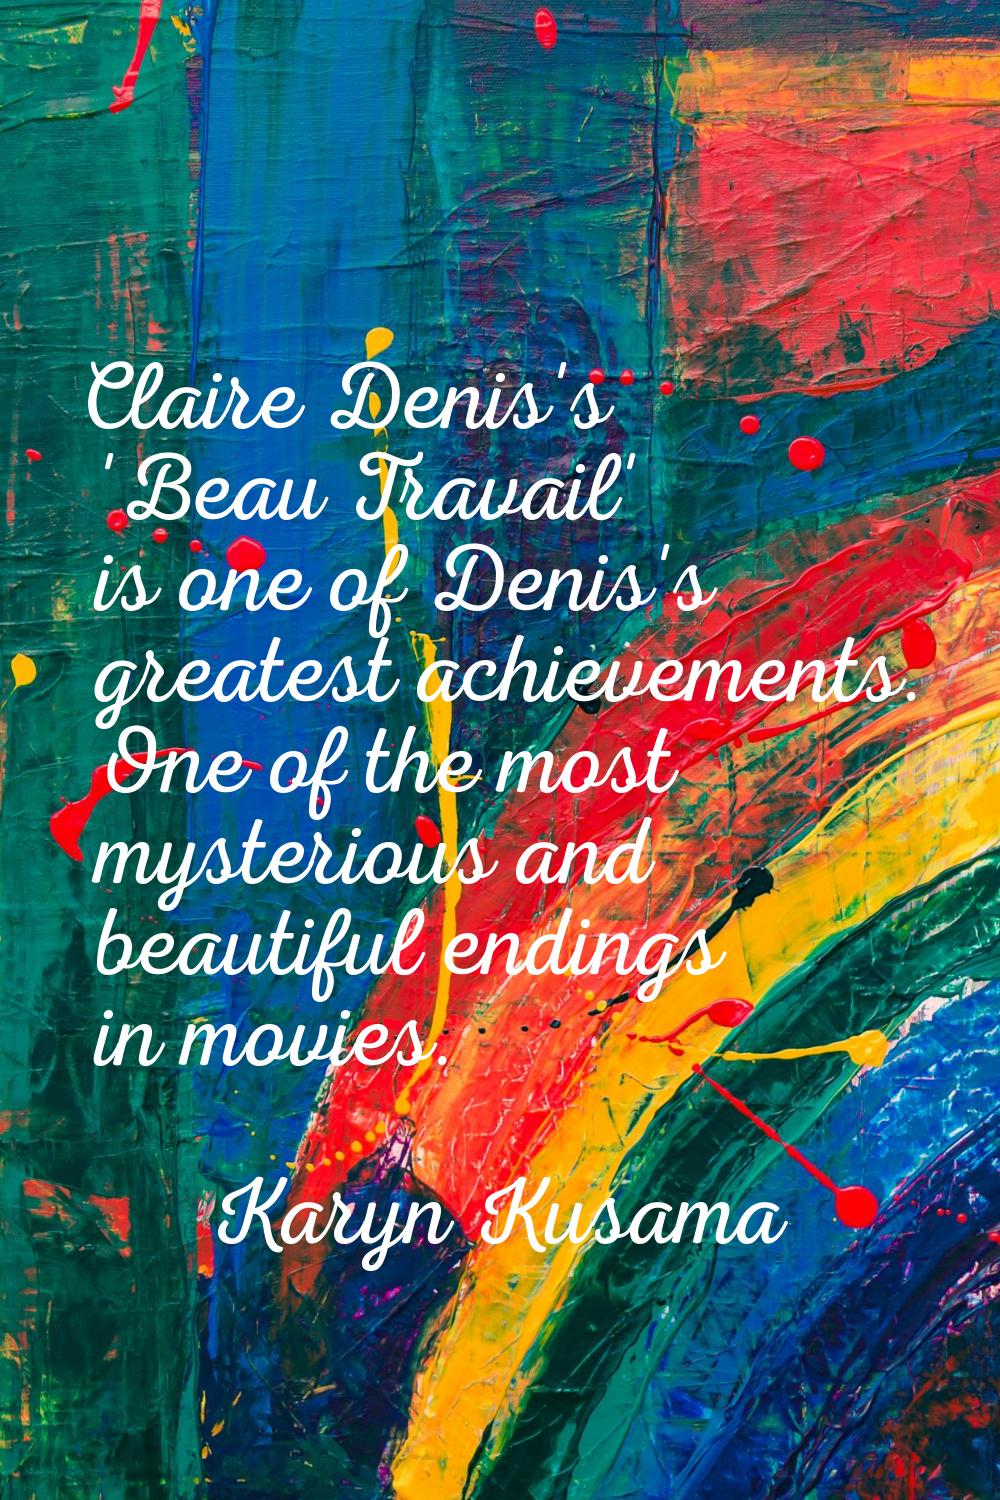 Claire Denis's 'Beau Travail' is one of Denis's greatest achievements. One of the most mysterious a